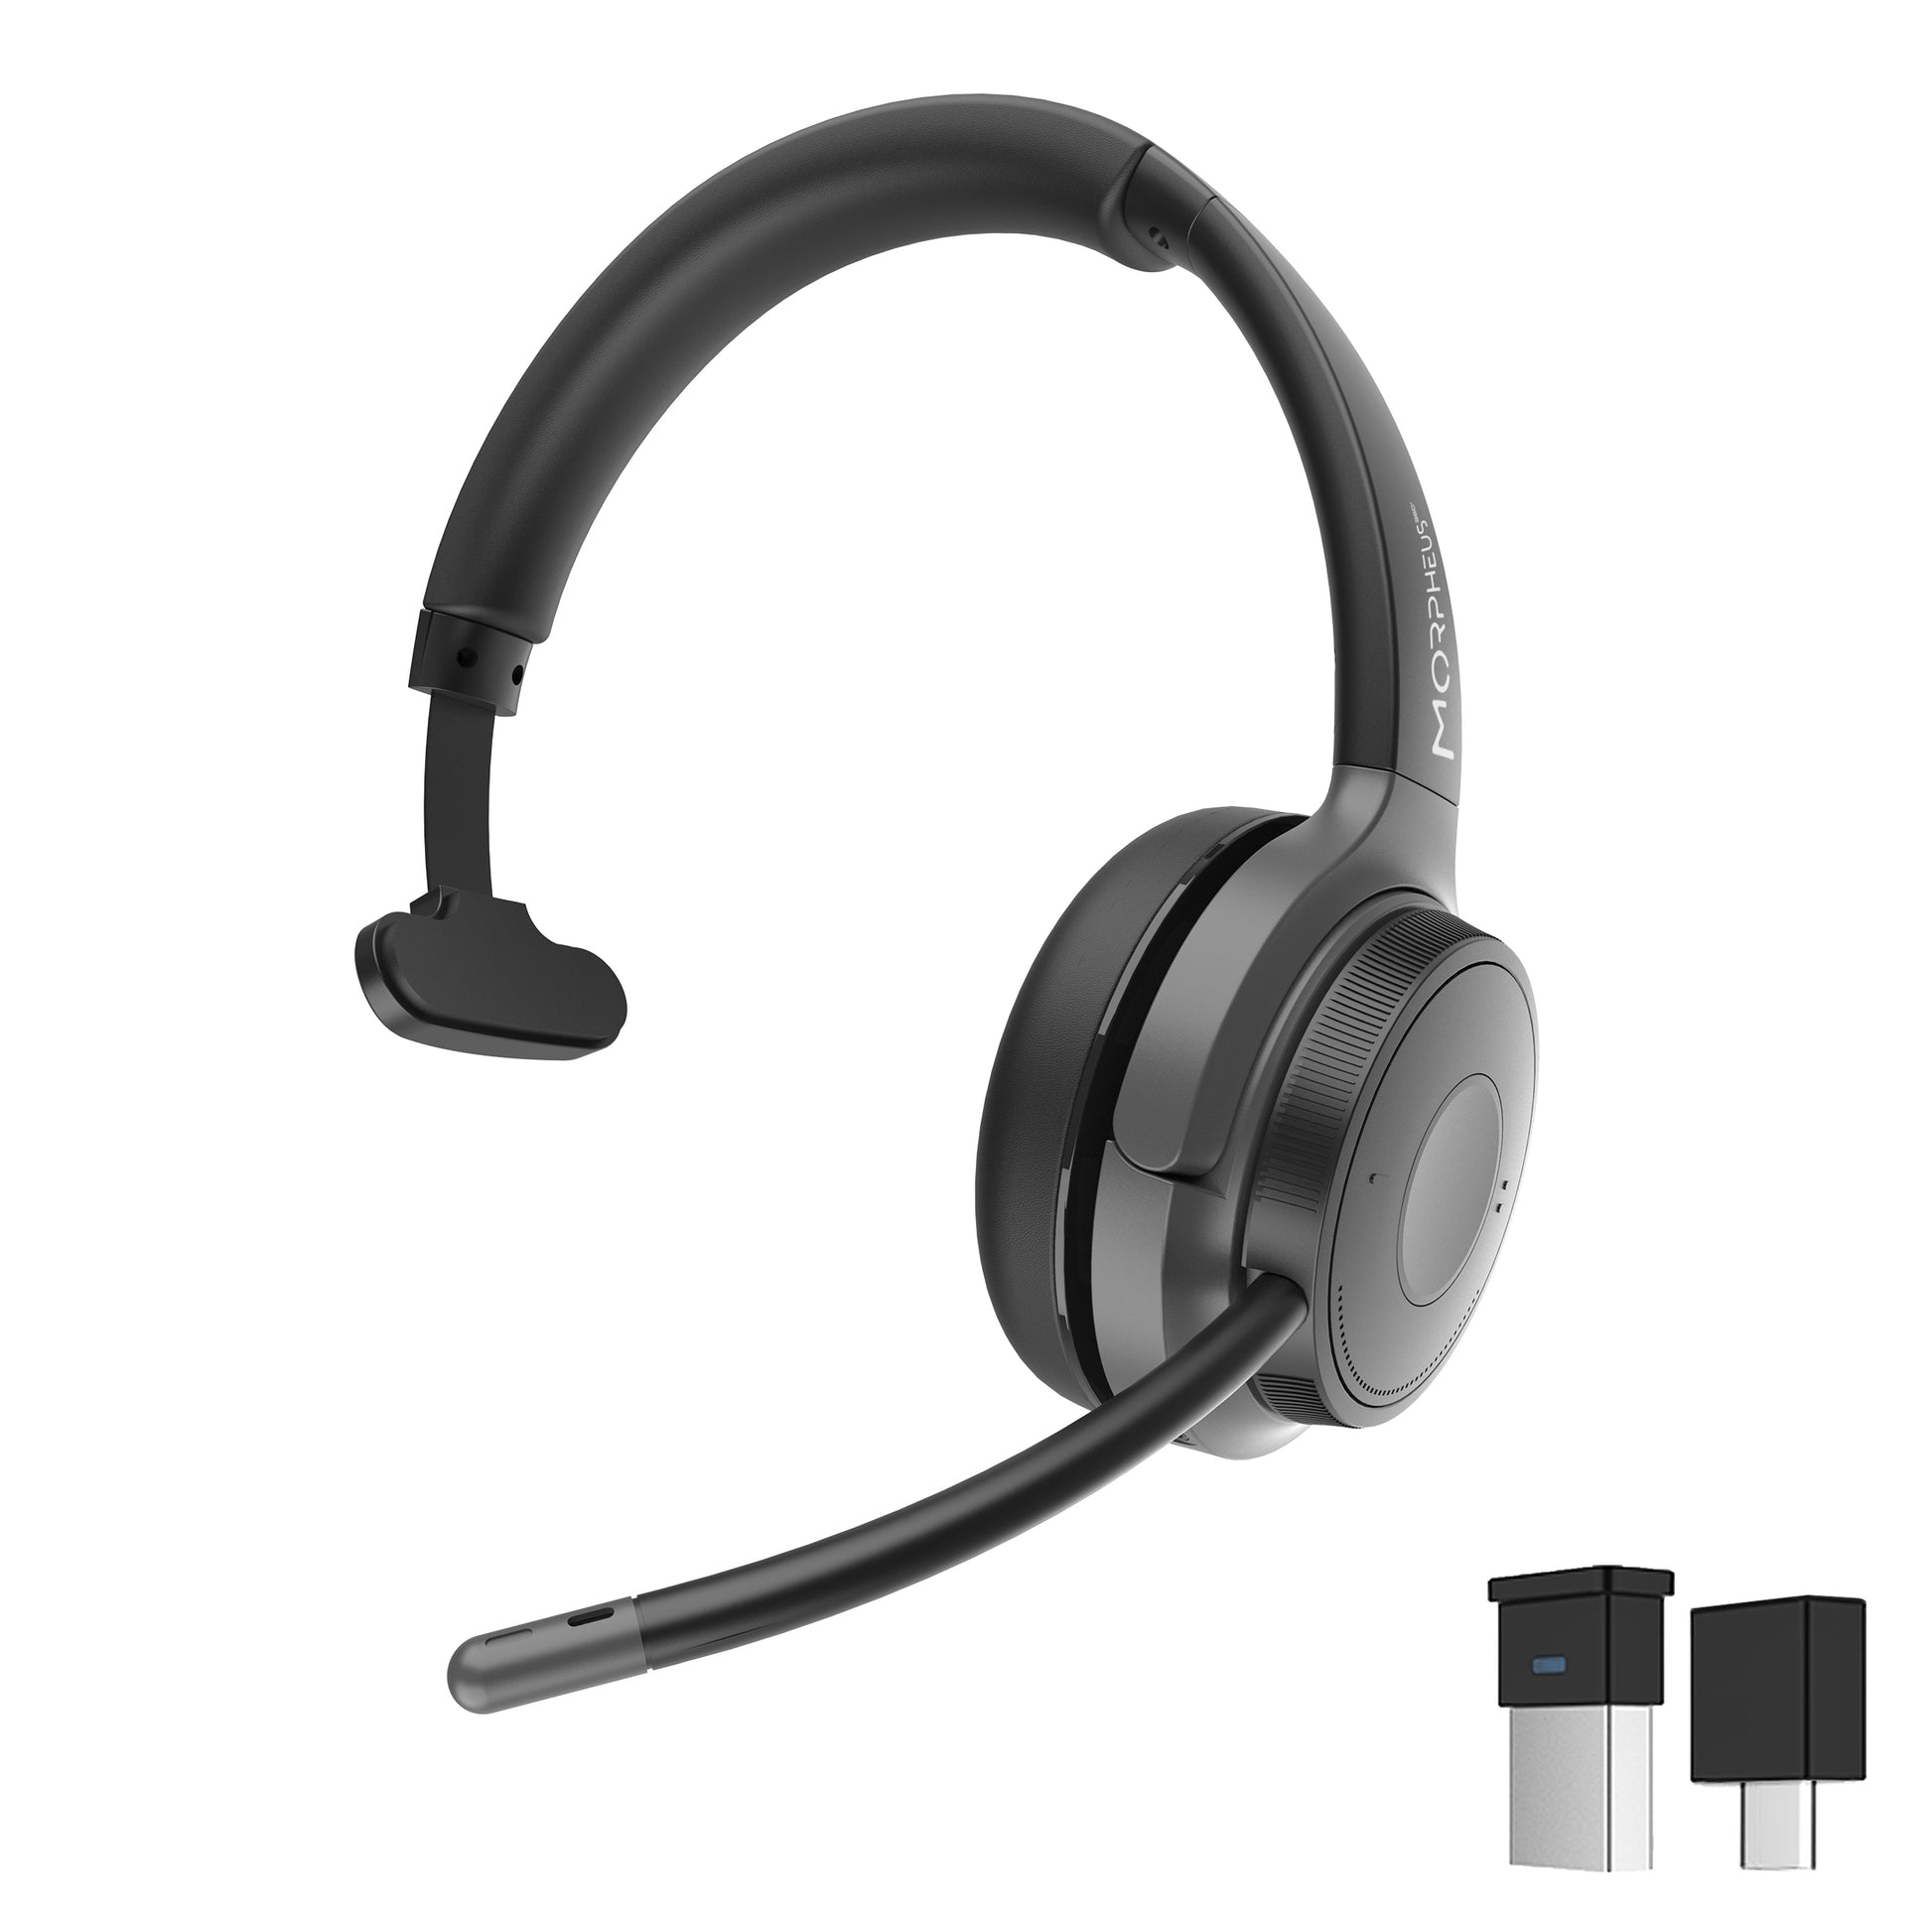 Front profile of the Advantage Wireless Mono Headset with padded headband and Memory foam ear cushion. Image shows USB A Receiver & USB C Adapter so you can connect the headset to Computers or tablets without Bluetooth